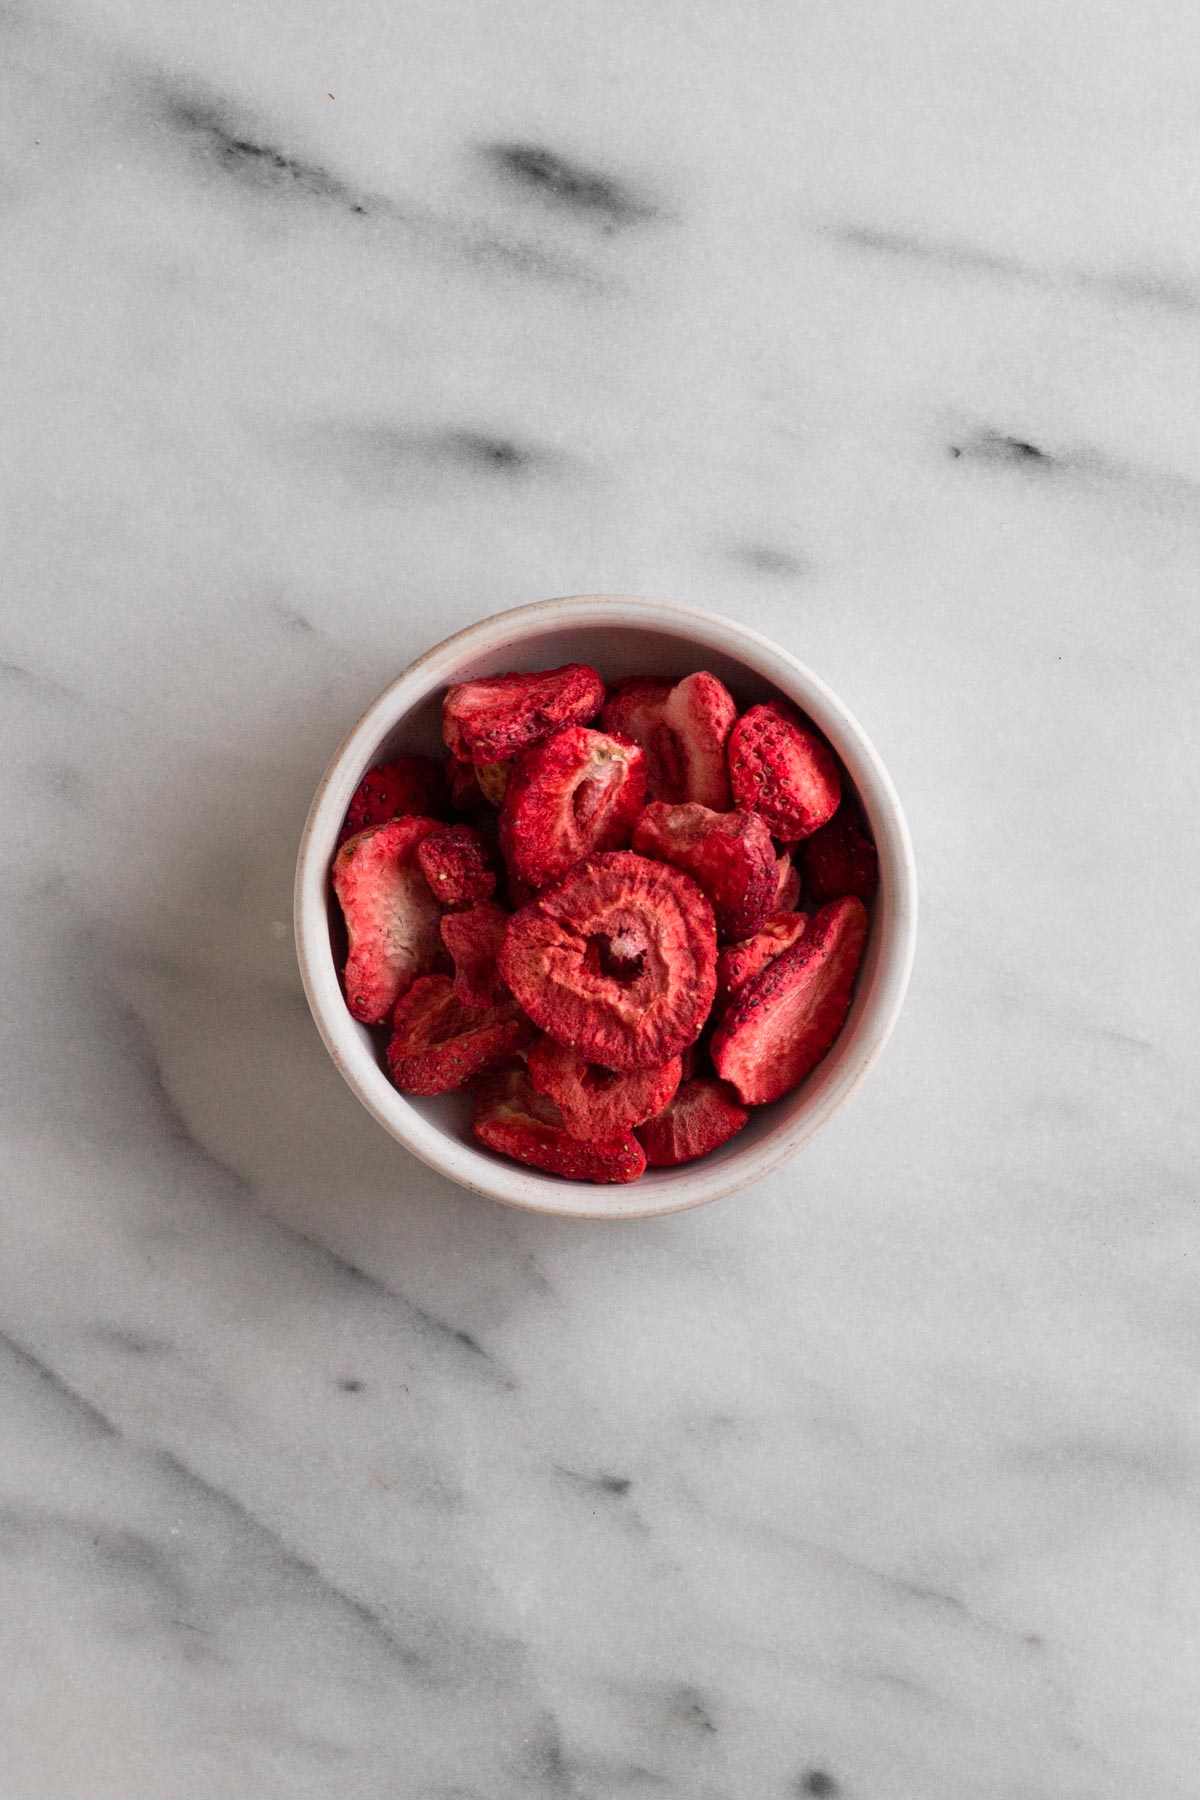 freeze-dried strawberries in a white dish